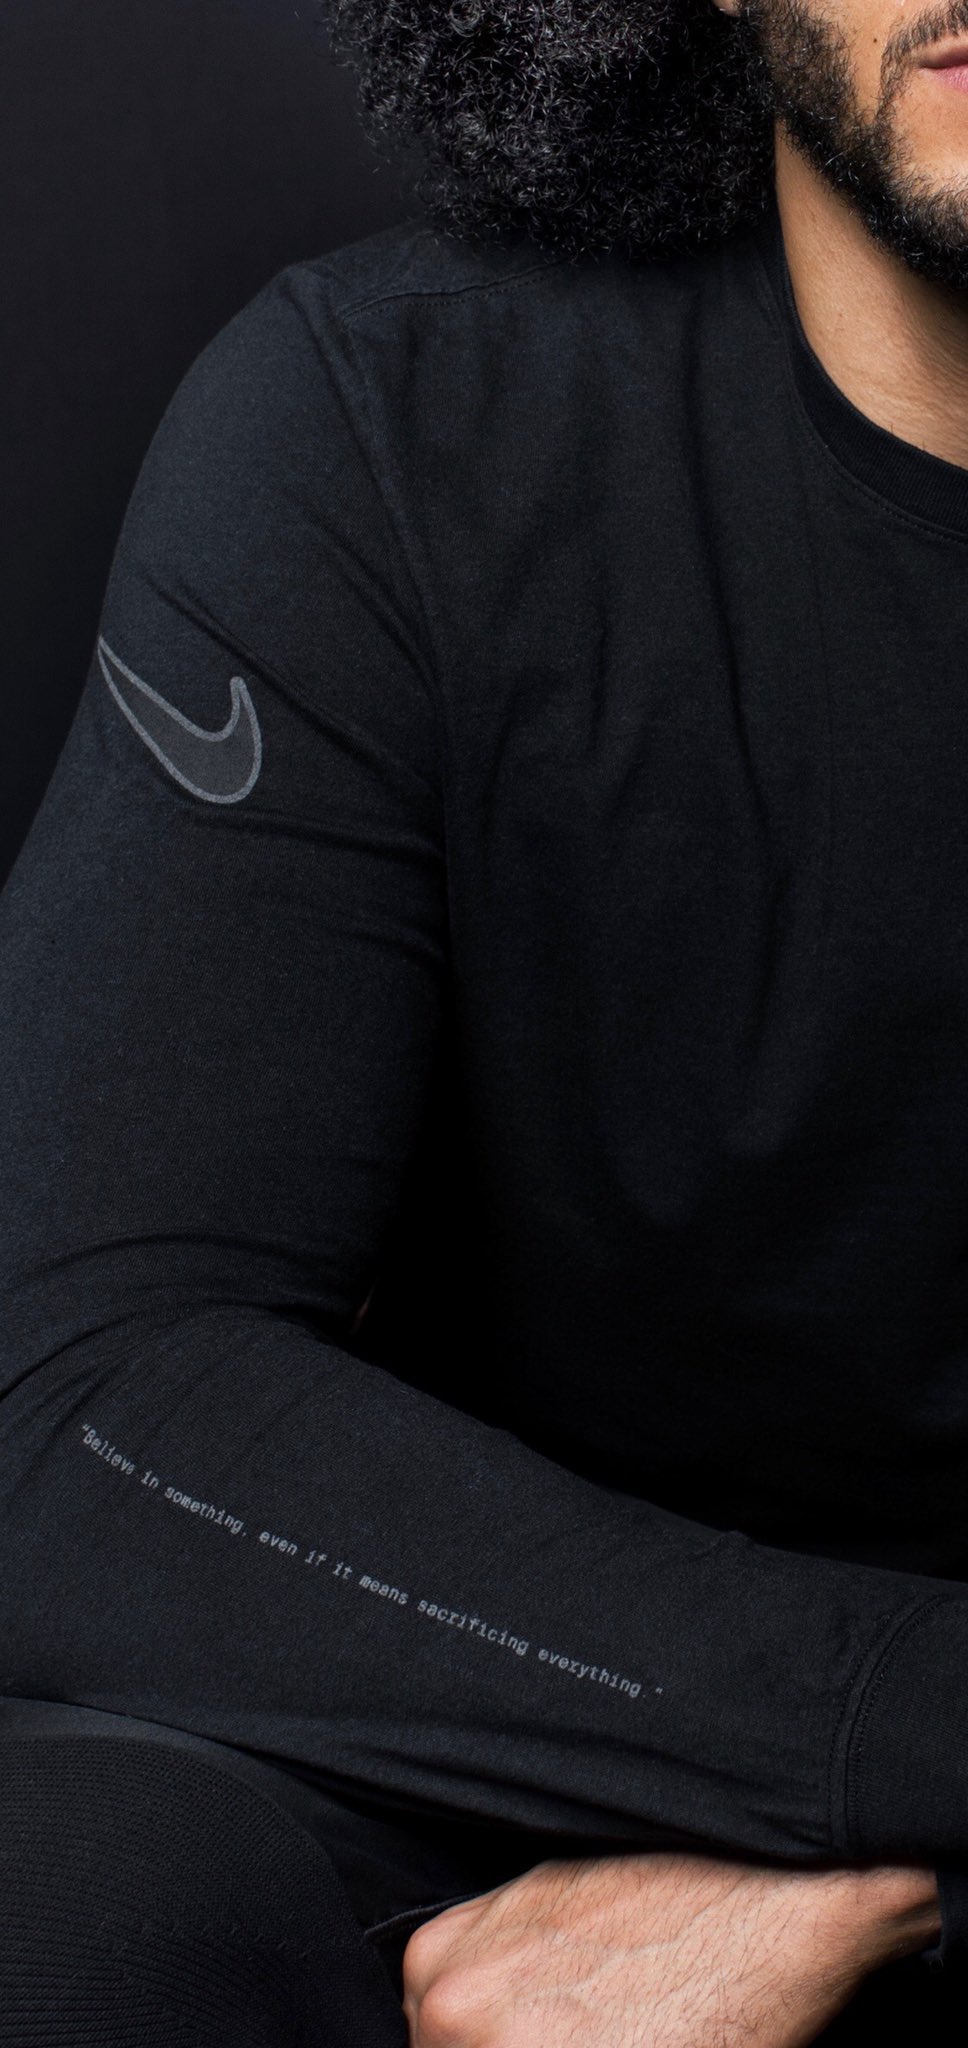 Significado nadie hostilidad Colin Kaepernick on Twitter: "The Nike Icon Tee is Back!  https://t.co/5OdvABSOrW https://t.co/RcgcXW8mSi" / Twitter